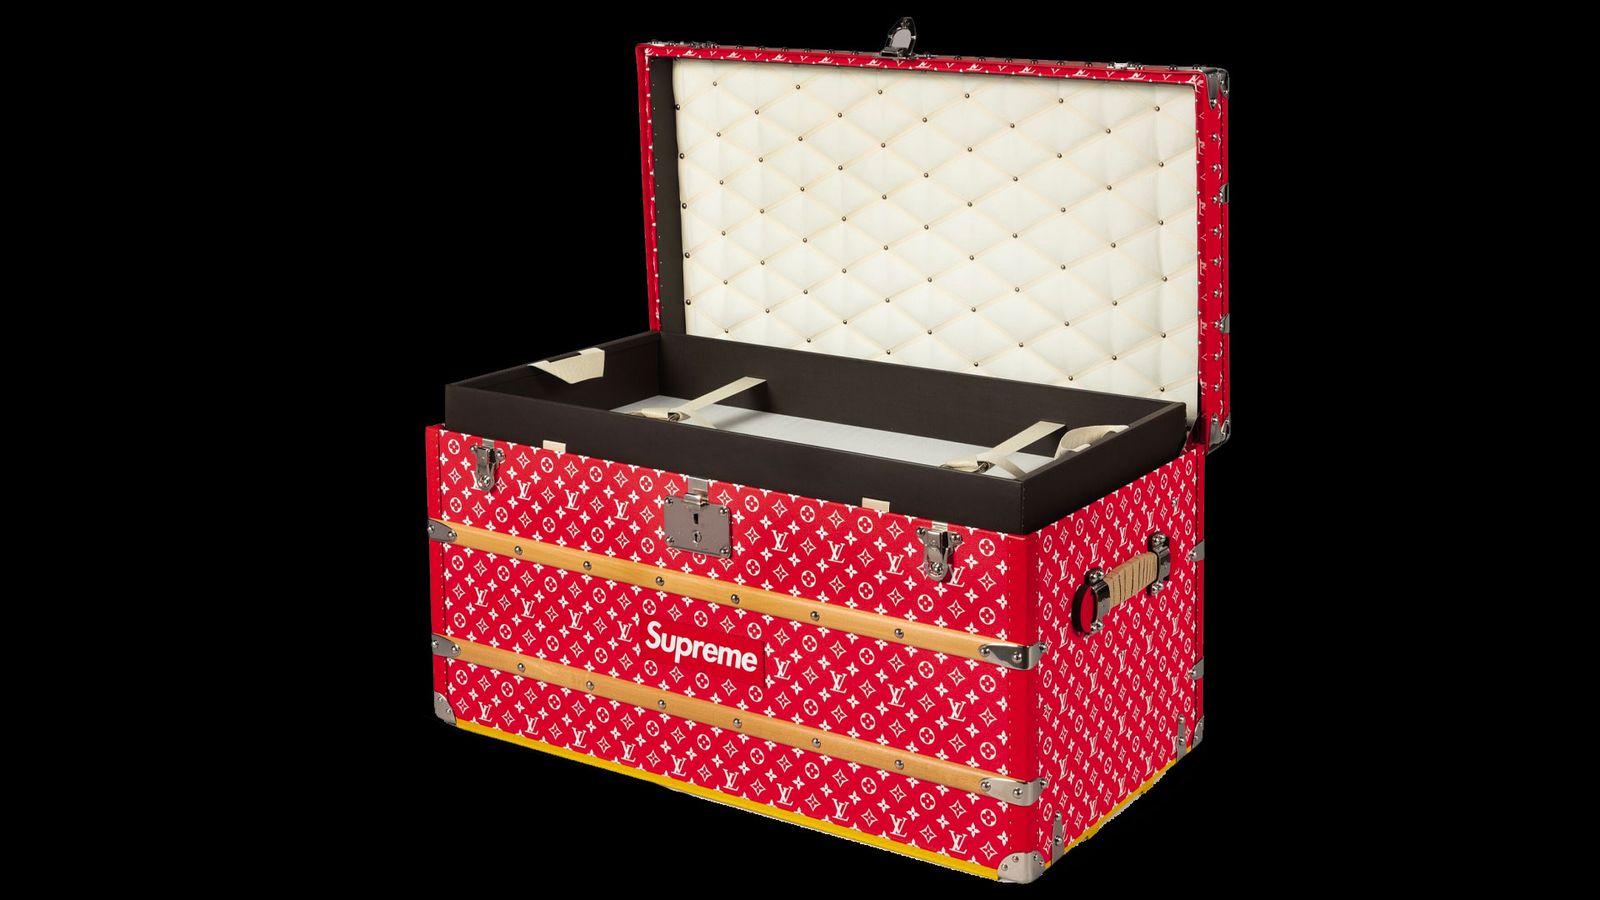 Supreme x Louis Vuitton Malle Courrier Trunk product image of a red monogram case.